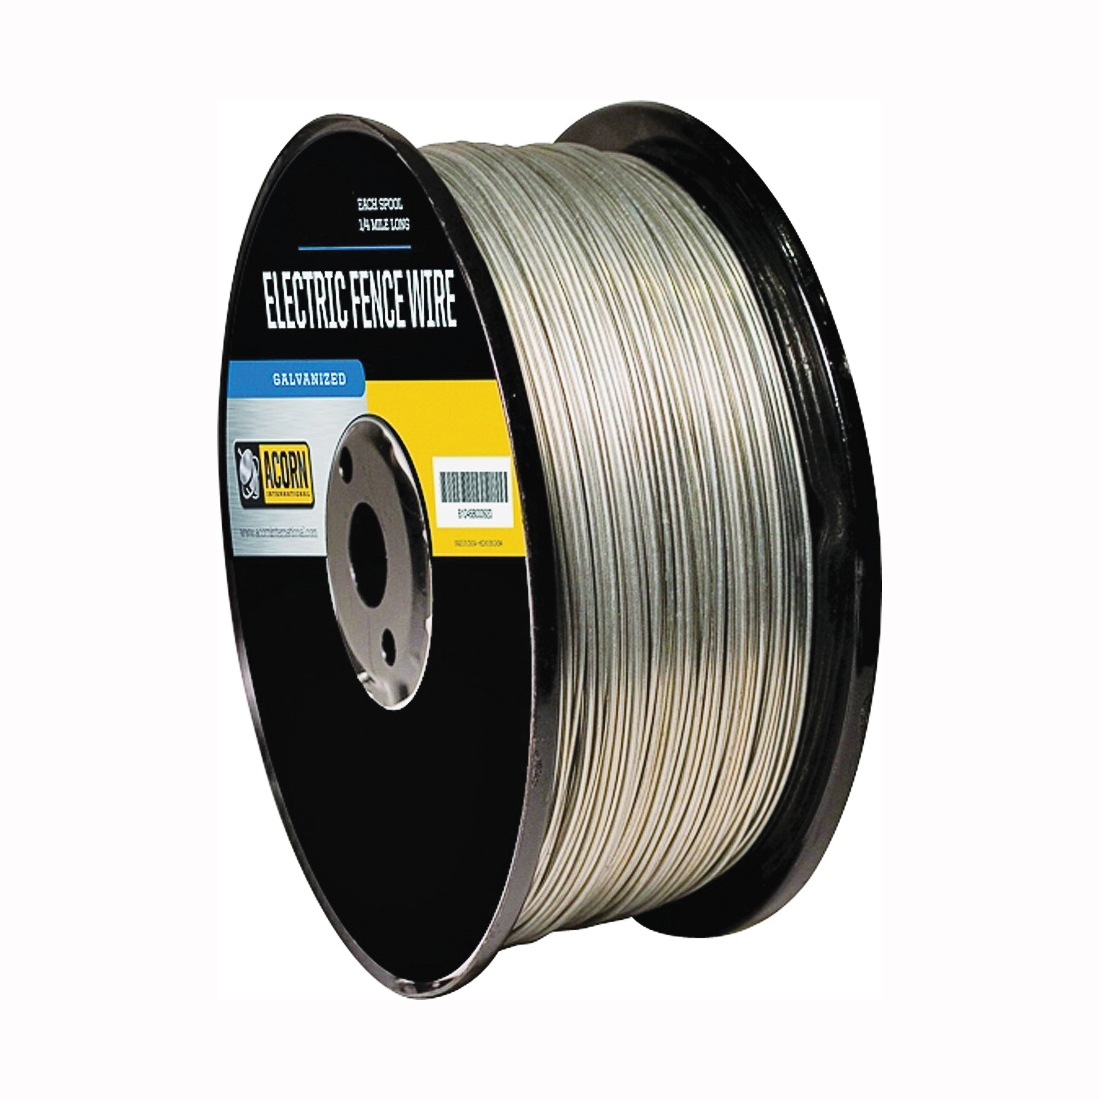 EFW1914 Electric Fence Wire, 19 ga Wire, Metal Conductor, 1/4 mile L